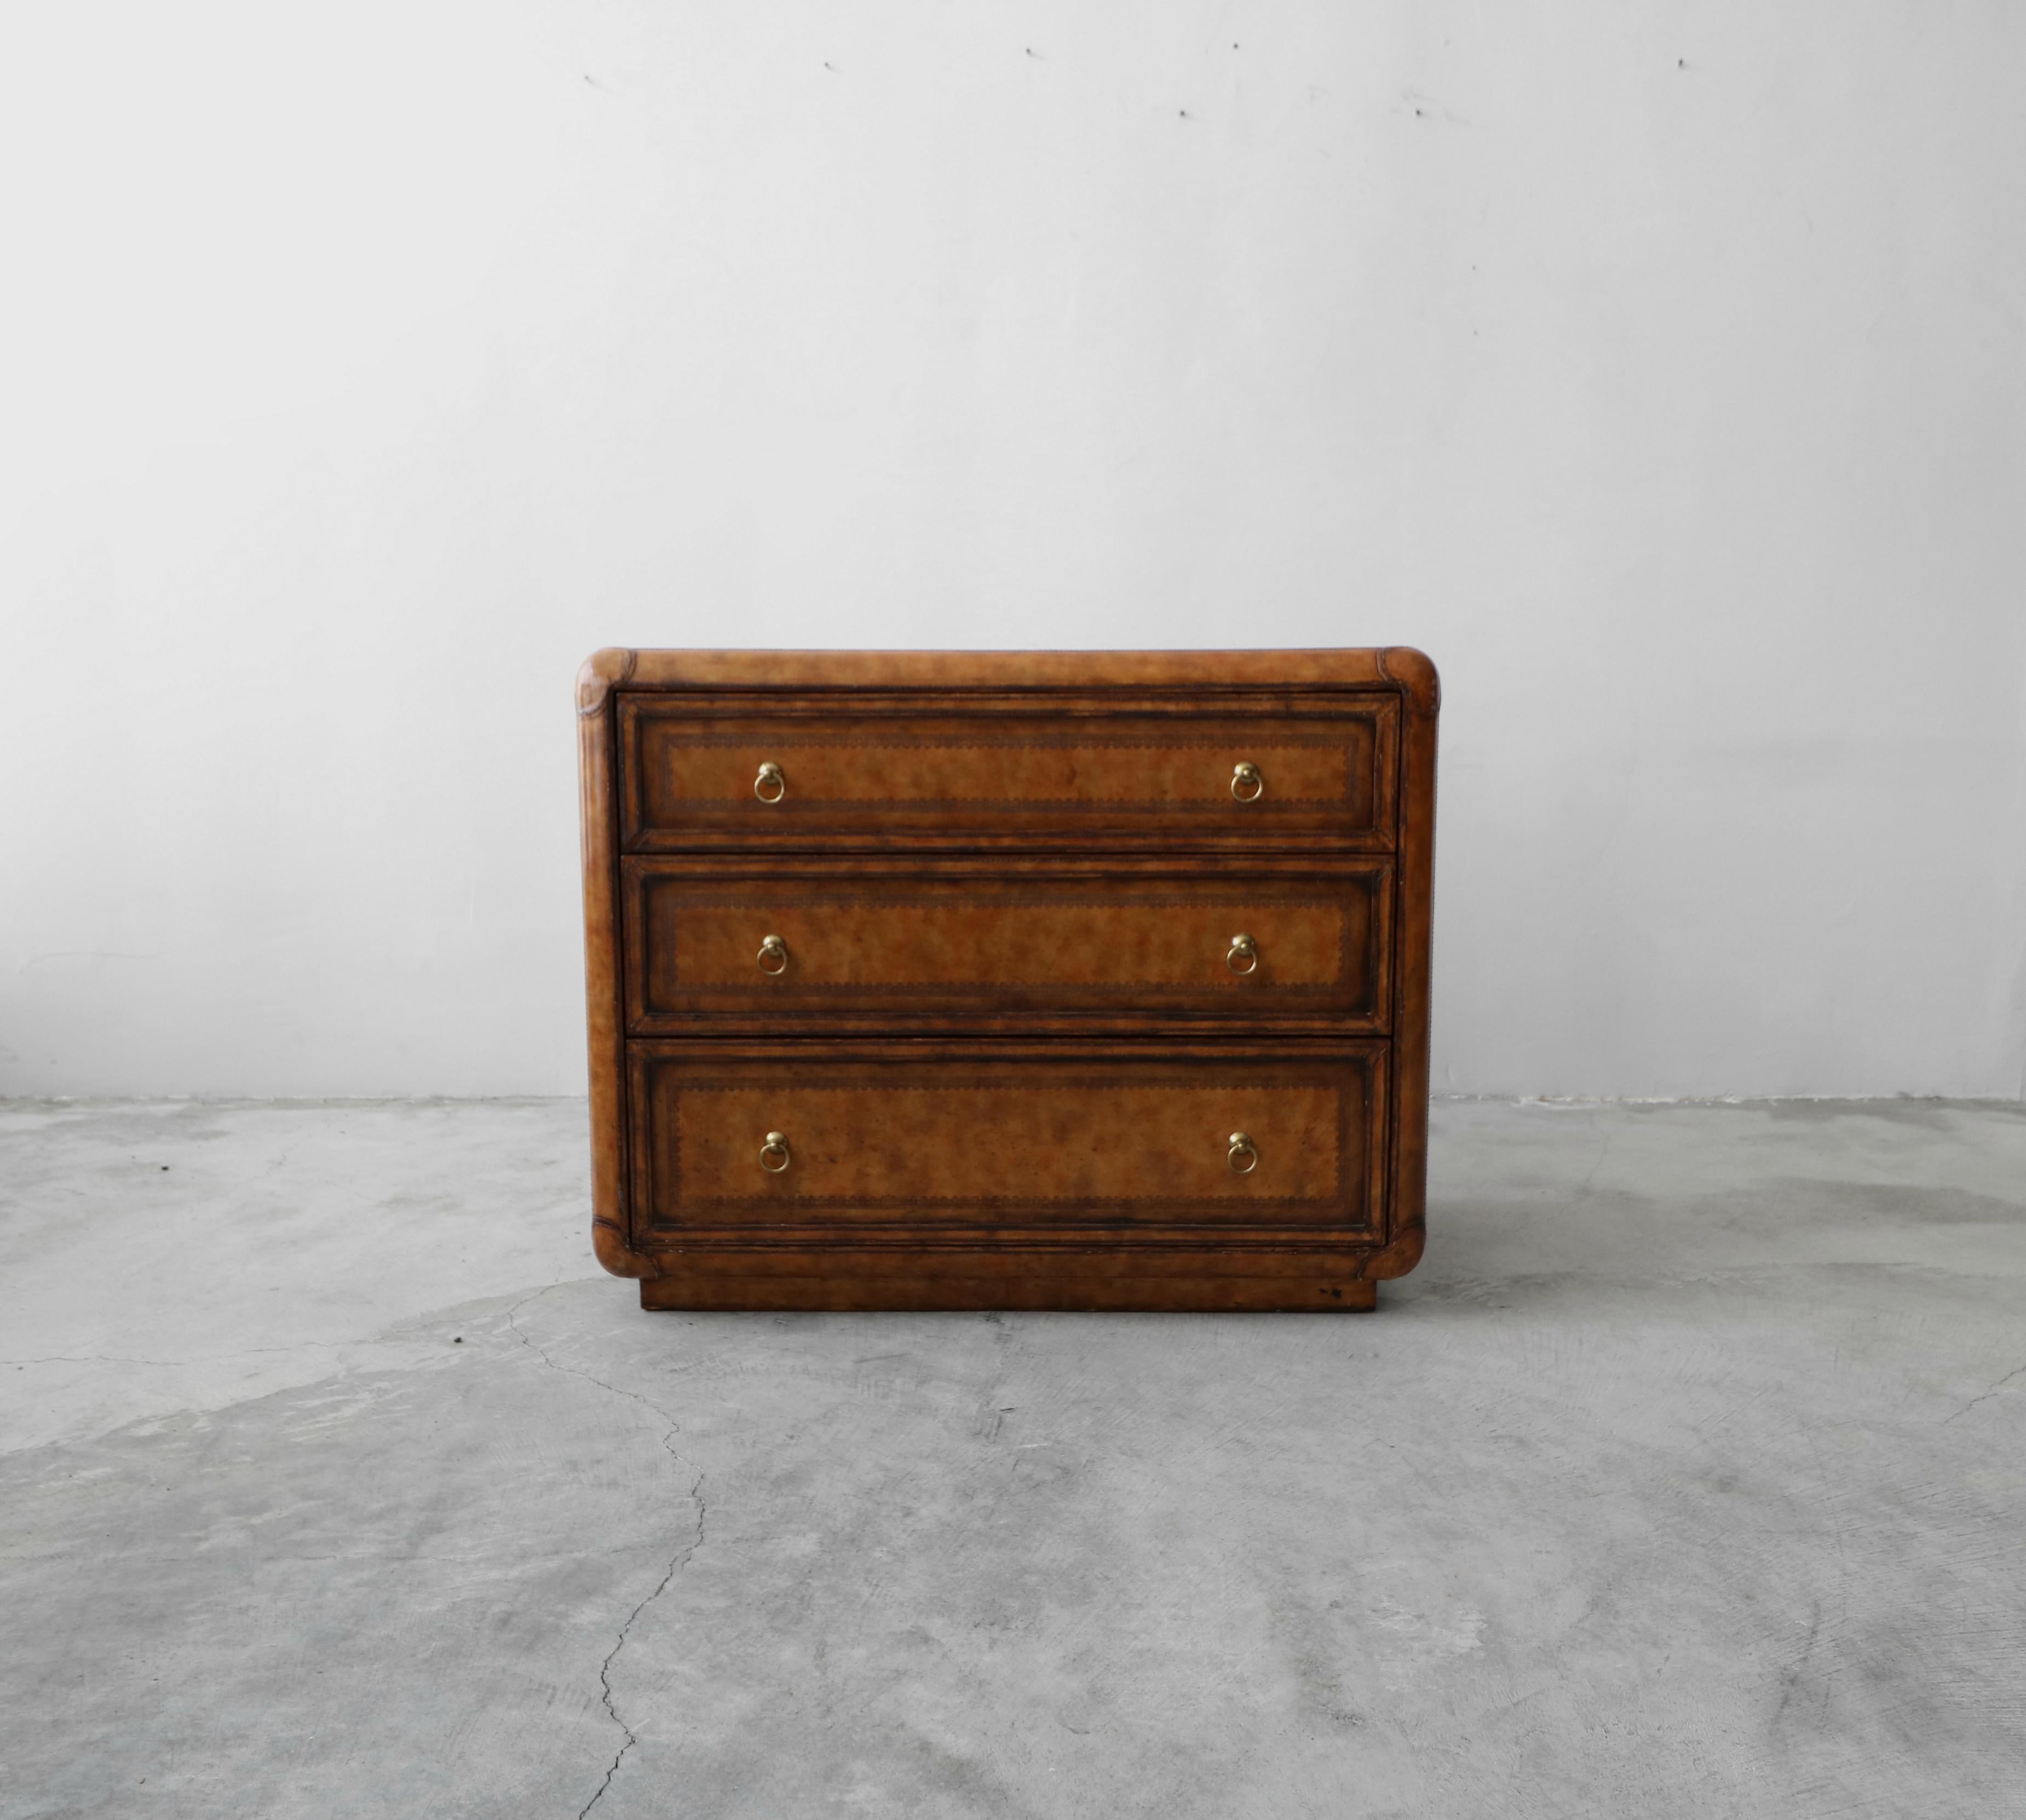 This gorgeous, leather covered chest is an exemplary example of Classic Maitland-Smith craftsmanship. Would make the perfect entry chest or men's dresser.

Chest is covered in beautifully patinaed leather, with hand tooled details and brass drawer